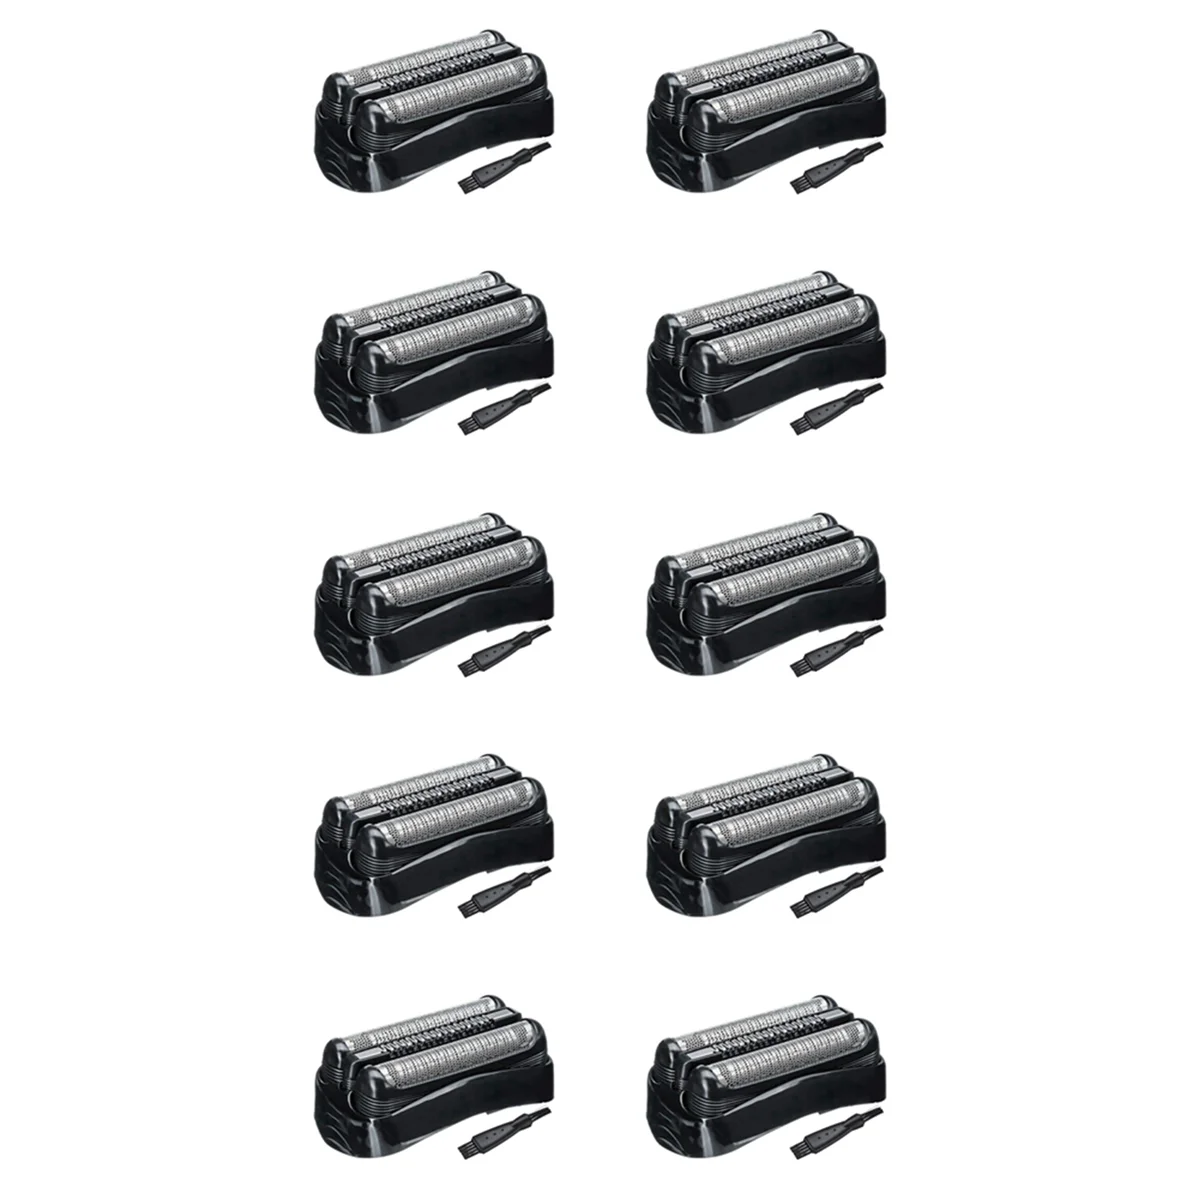 

10X 21B Shaver Replacement Head for Braun Series 3 Electric Razors 301S,310S,320S,330S,340S,360S,3010S,3020S,3030S,3040